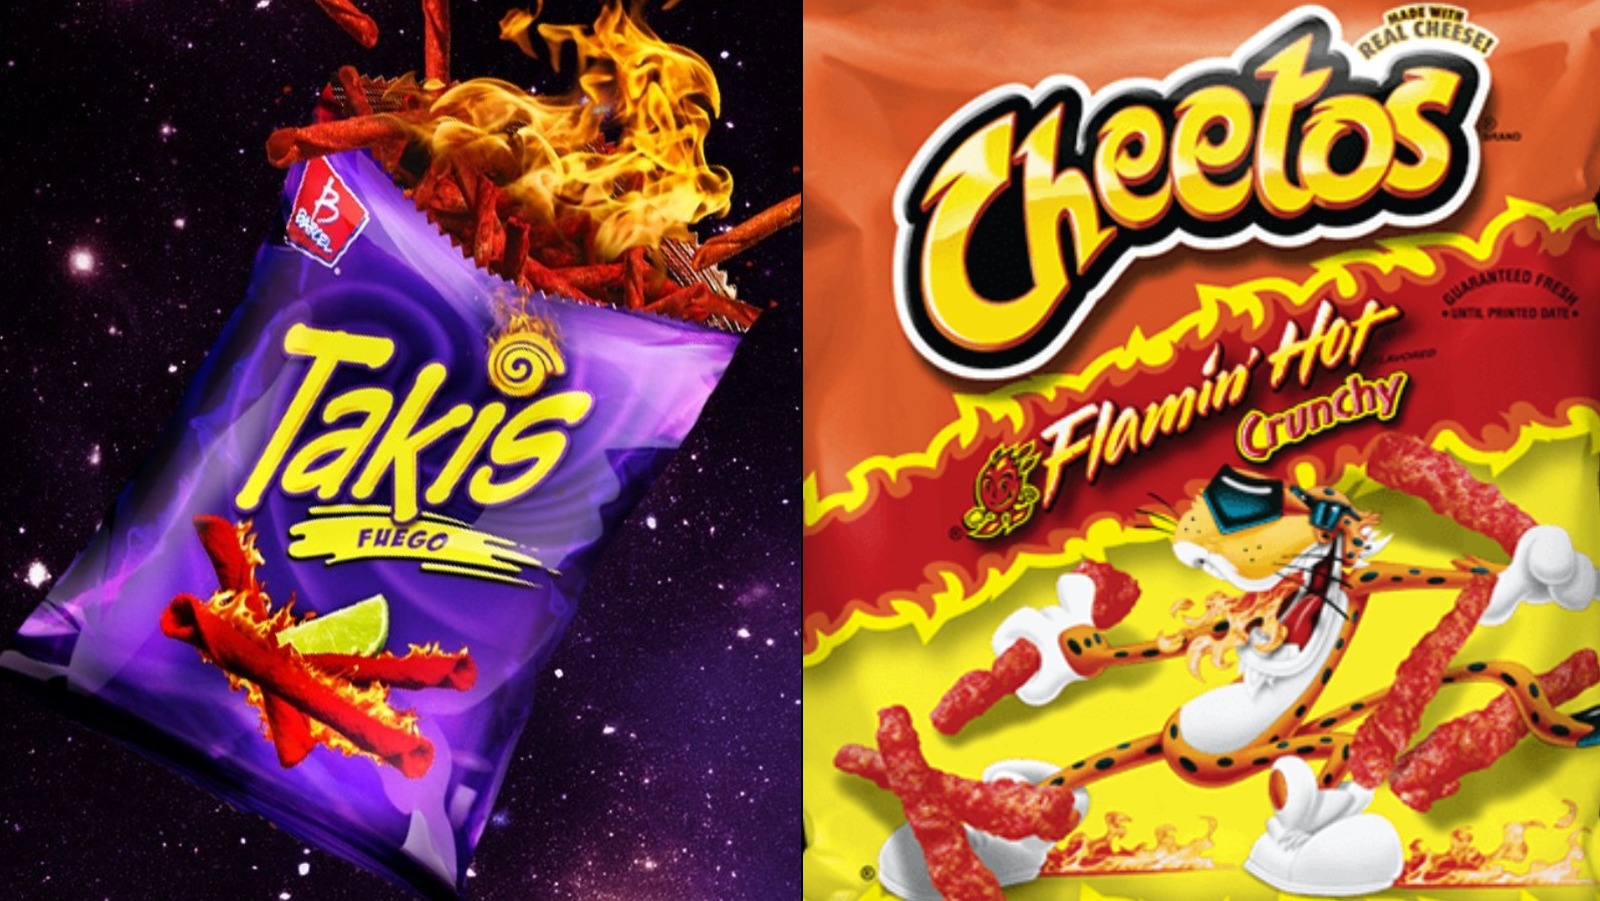 Flamin' Hot Cheetos Facts - 8 Things to Know About Flaming Hot